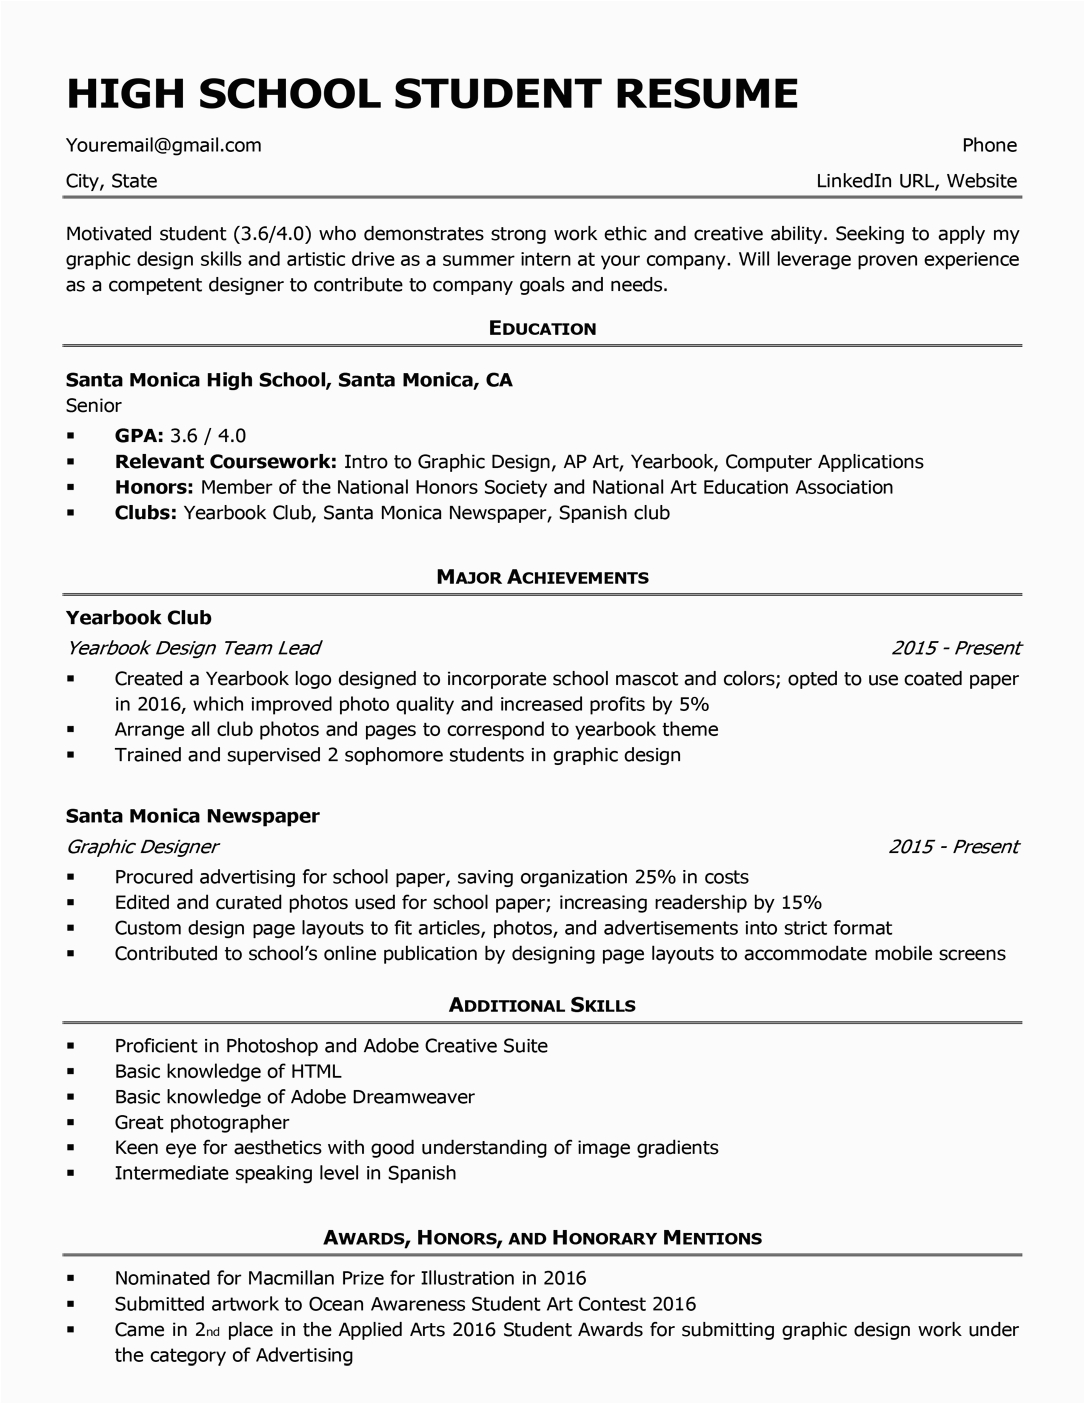 Simple Sample Resume for High School Student High School Resume Template & Writing Tips